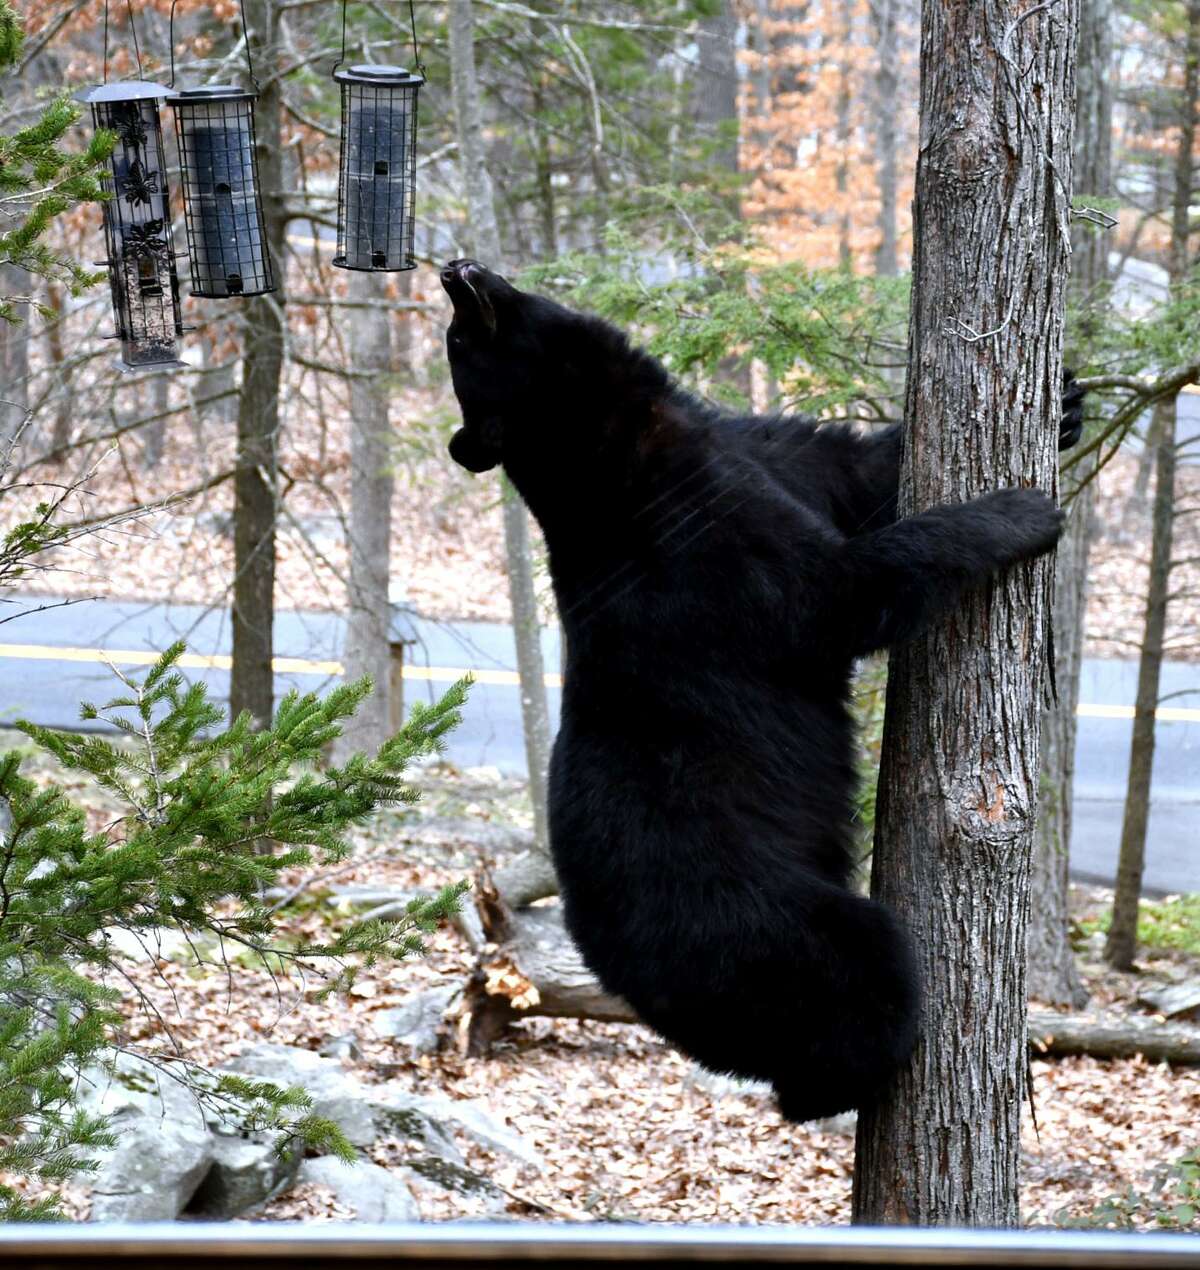 This bear was photographed climbing a tree to get at birdfeeders in Brookfield, Conn. April 12, 2018.